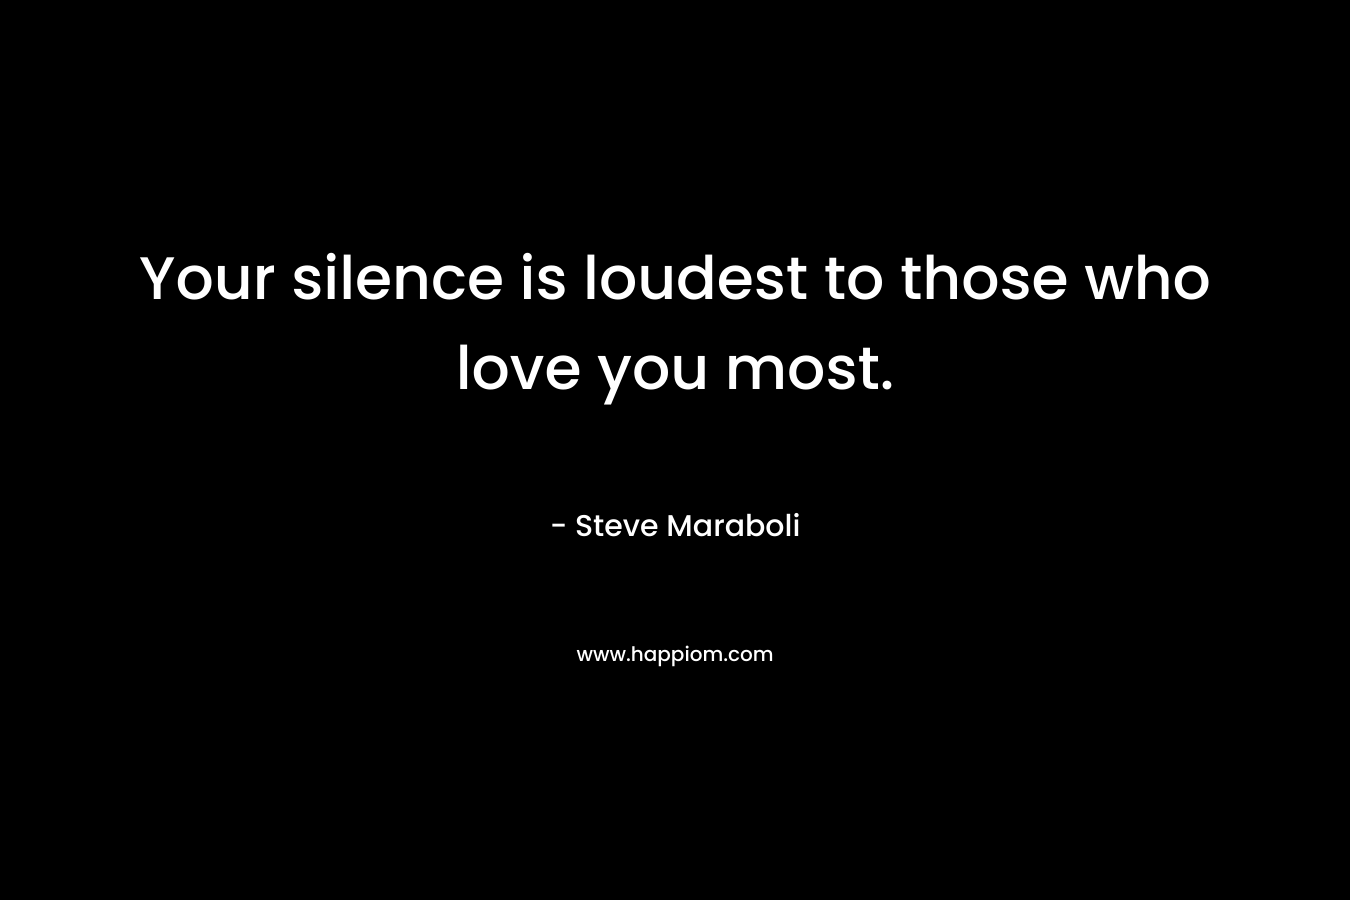 Your silence is loudest to those who love you most.